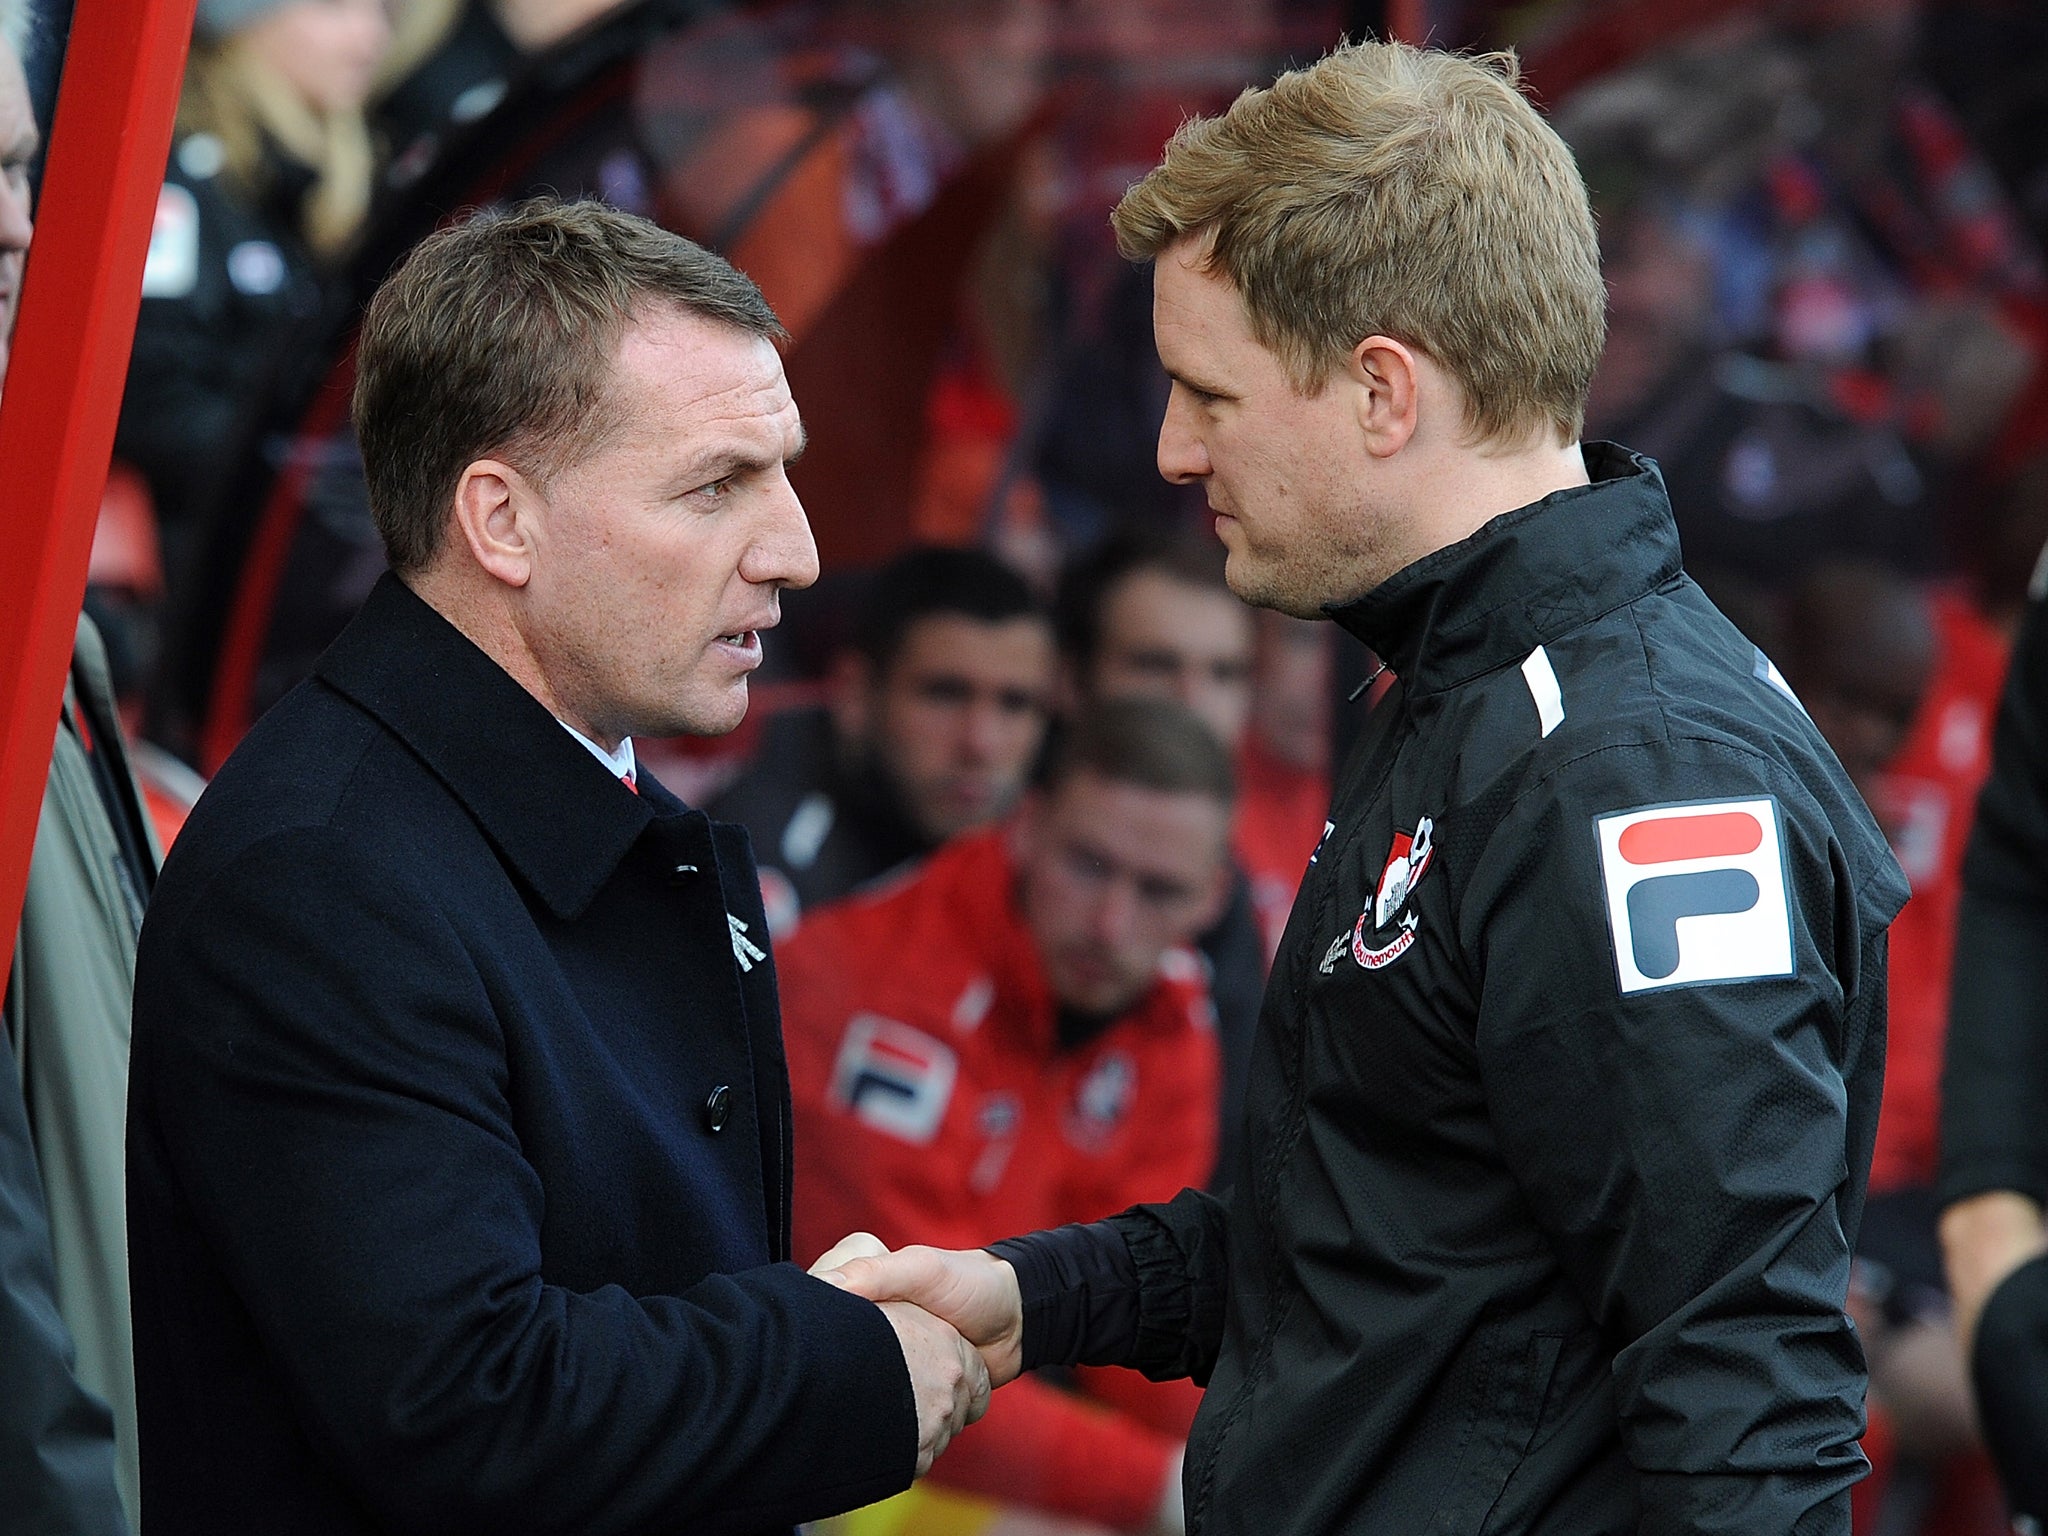 Brendan Rodgers shakes hands with Eddie Howe after Liverpool's 2-0 victory over Bournemouth